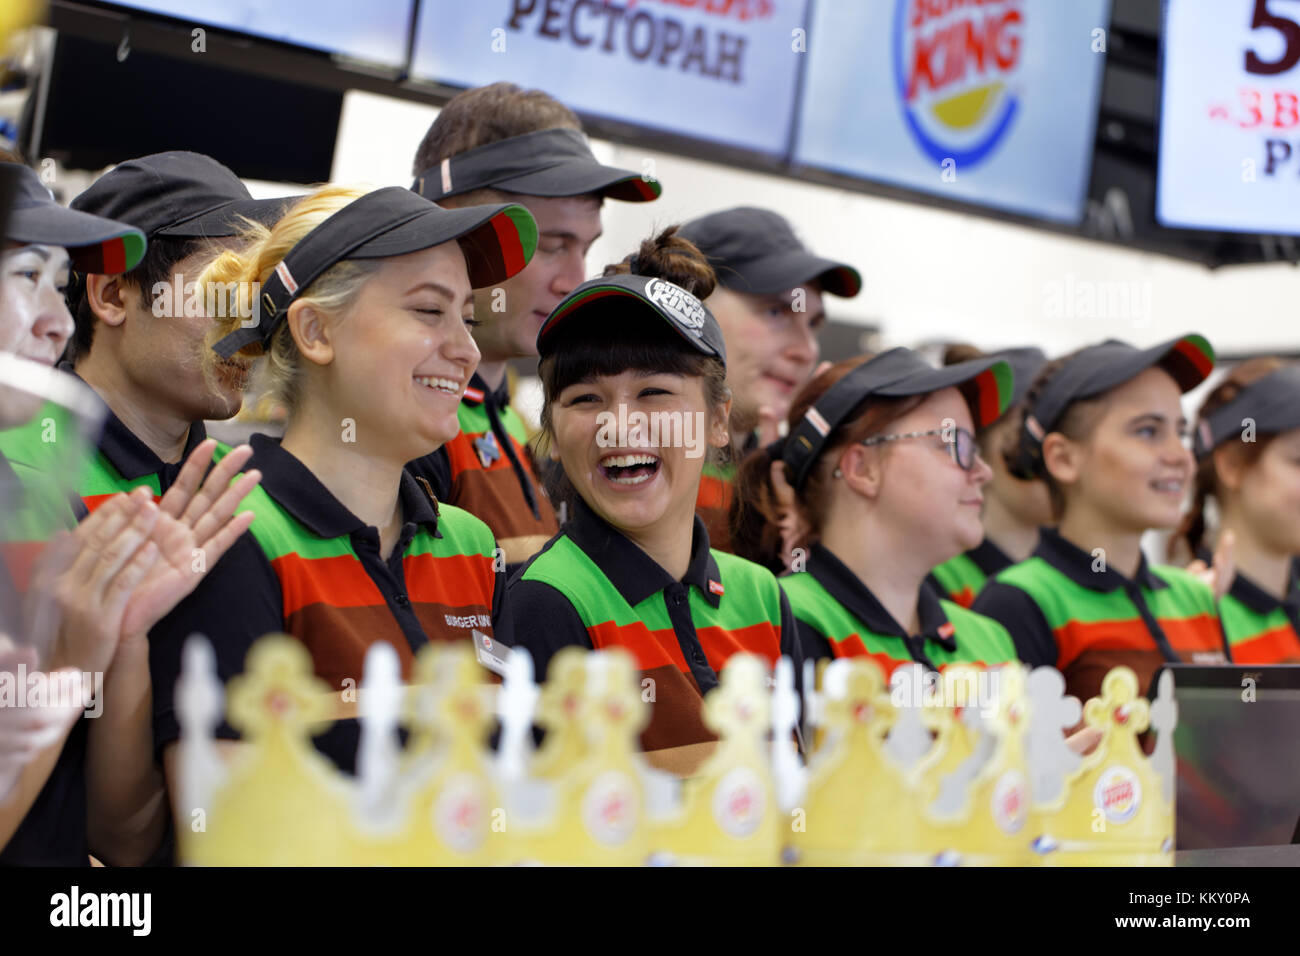 St. Petersburg, Russia - November 29, 2017: Staff of 500th Burger King restaurant in Russia in the service area in the day of opening. First Burger Ki Stock Photo